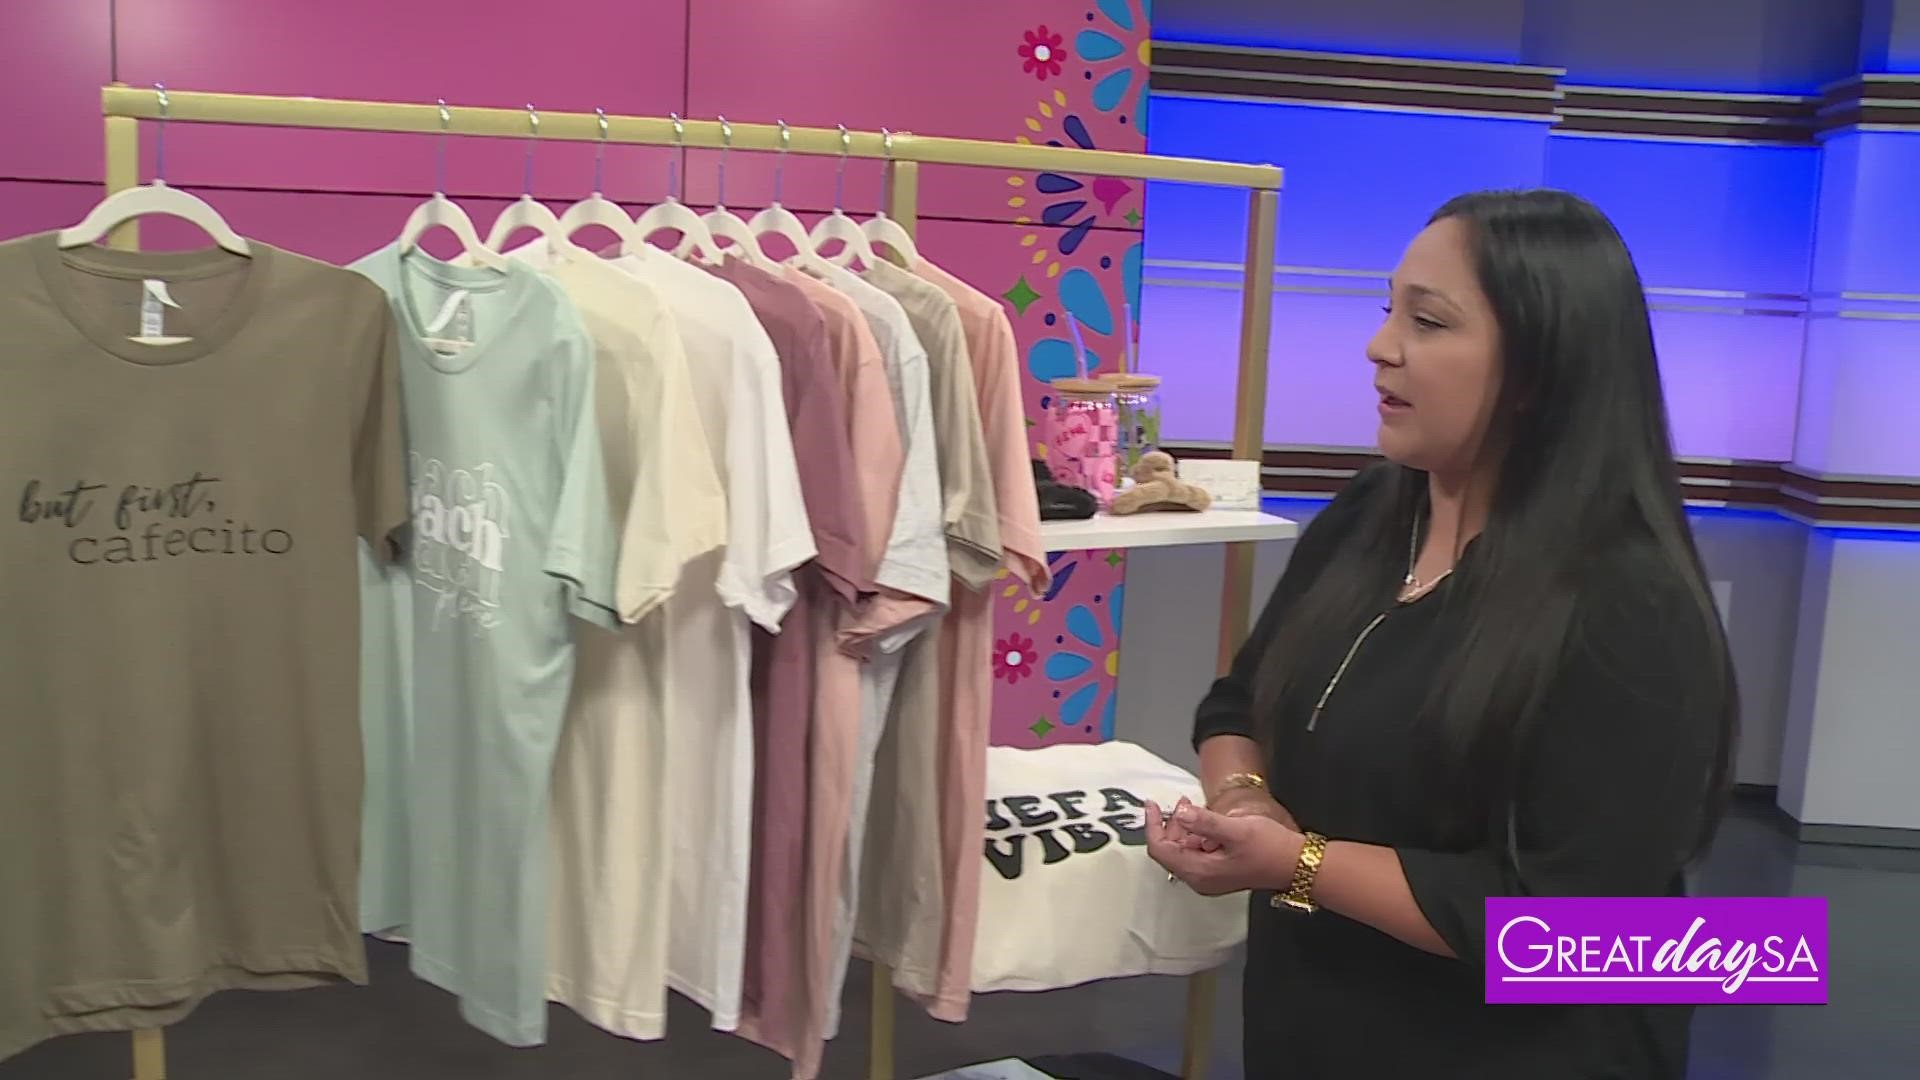 Amelia Stevens of Simply Mia Co. shares how she inspires people with her designs.